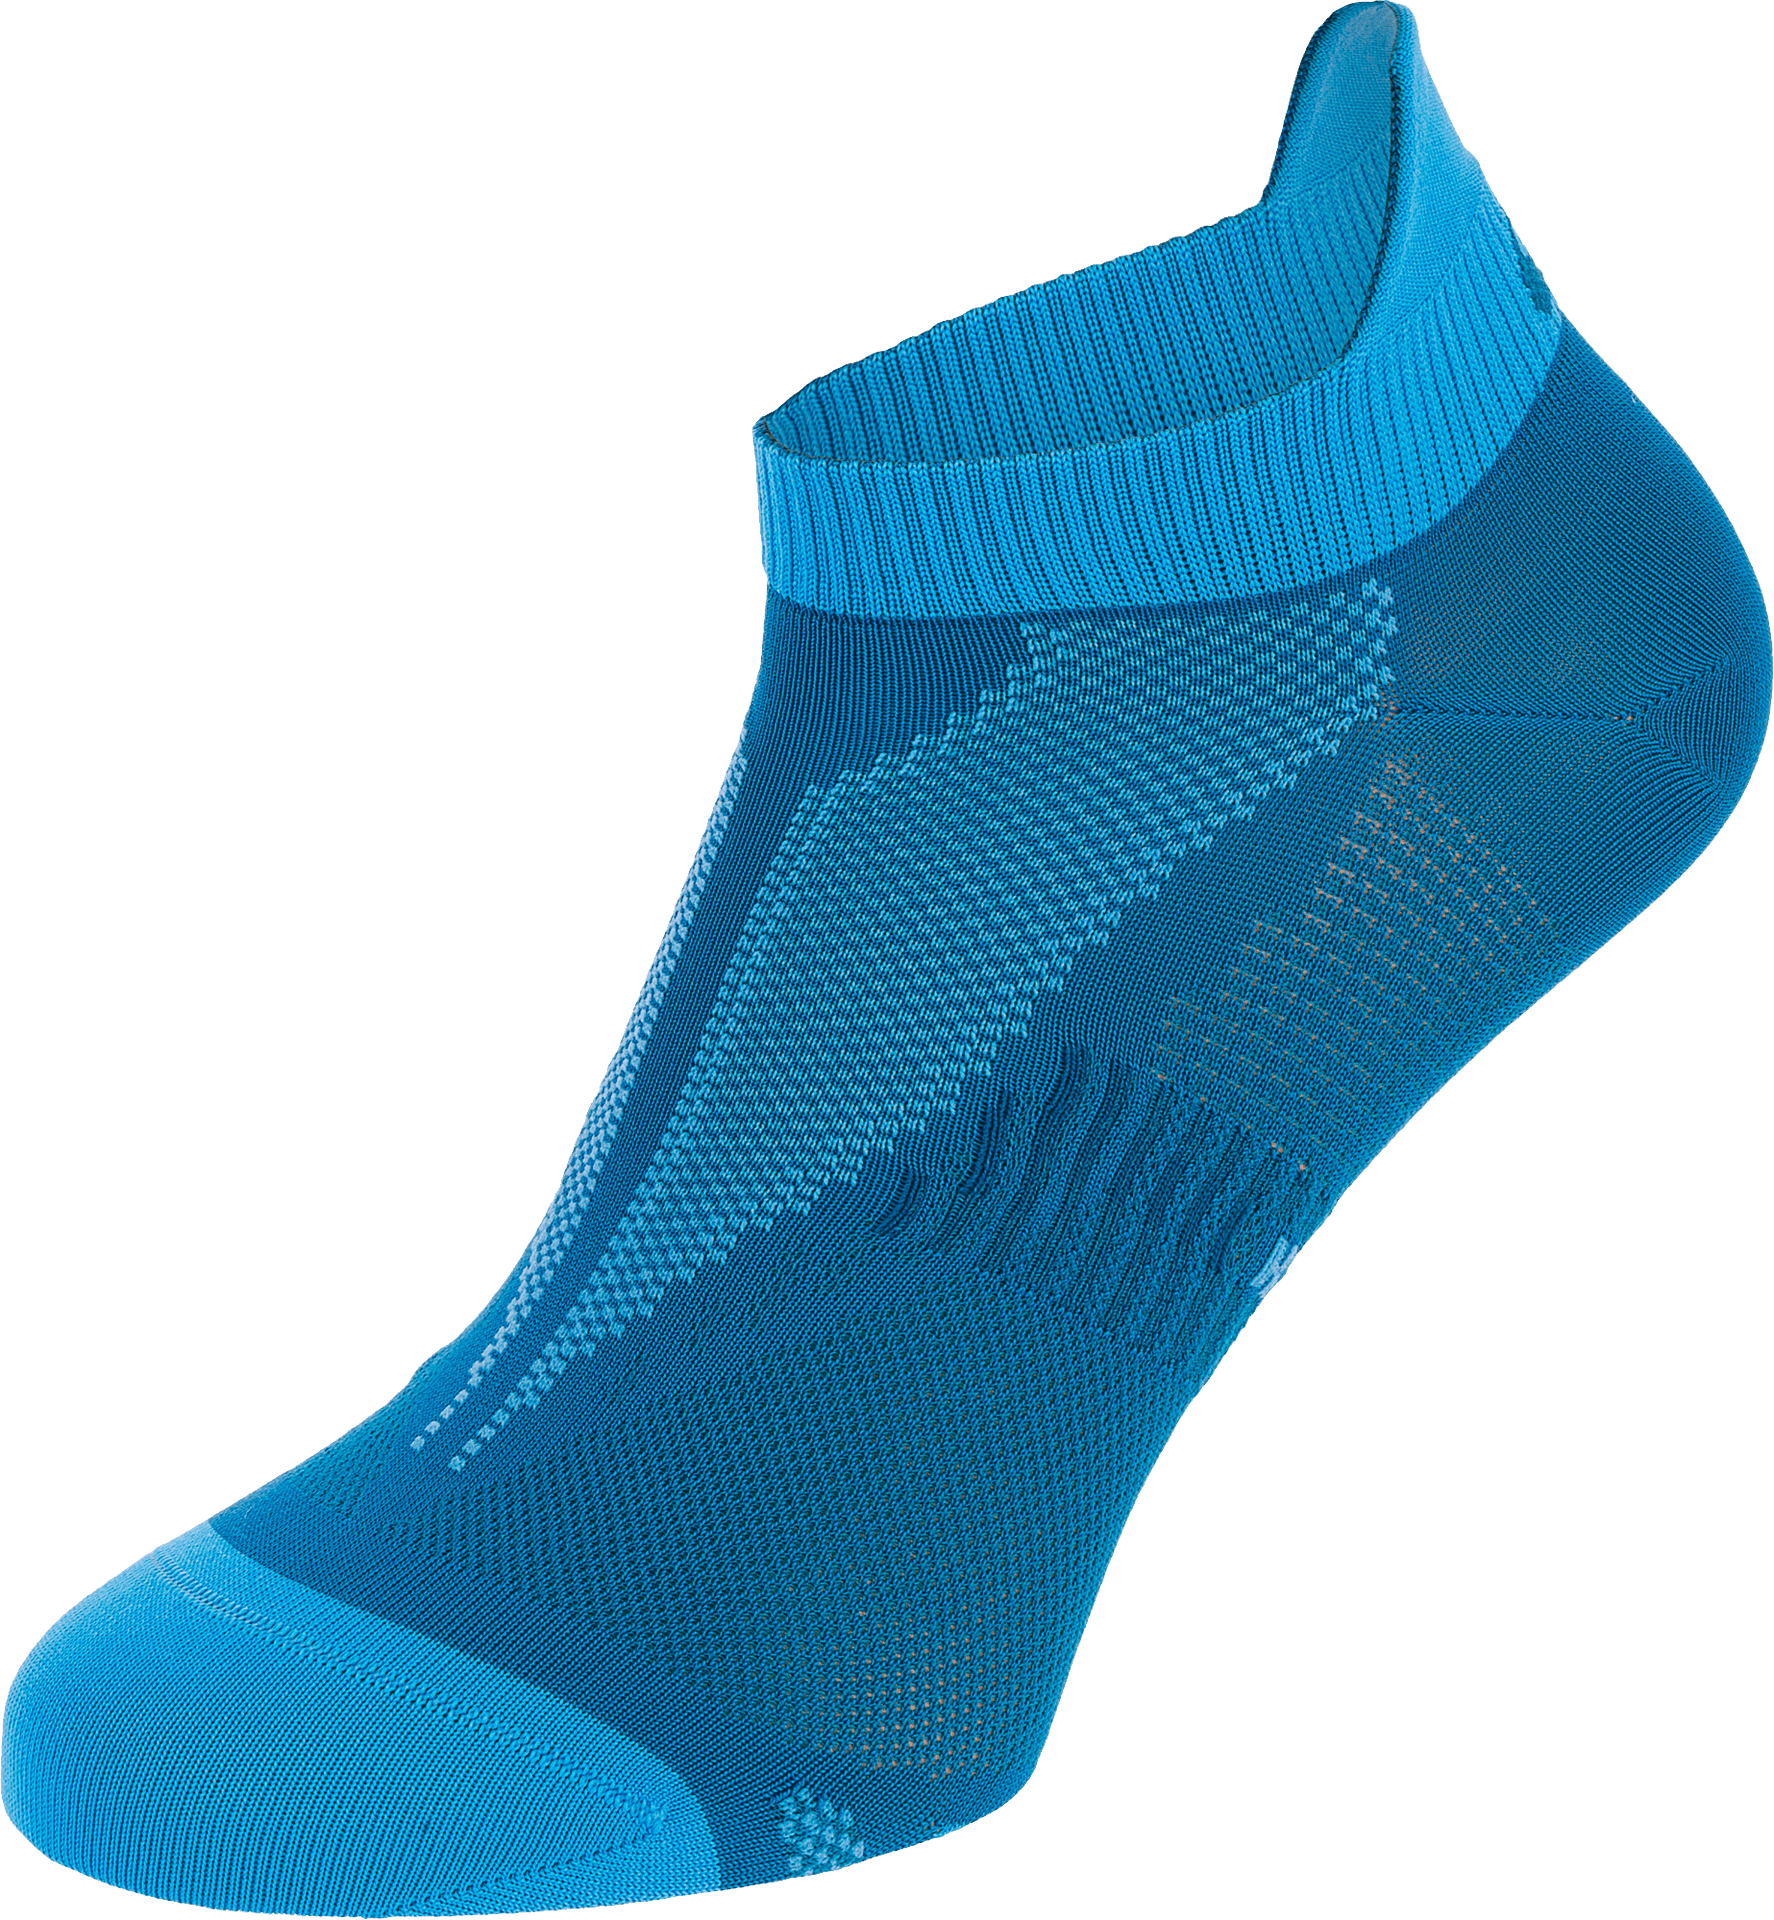 Blue Ankle Sock Isolated PNG image